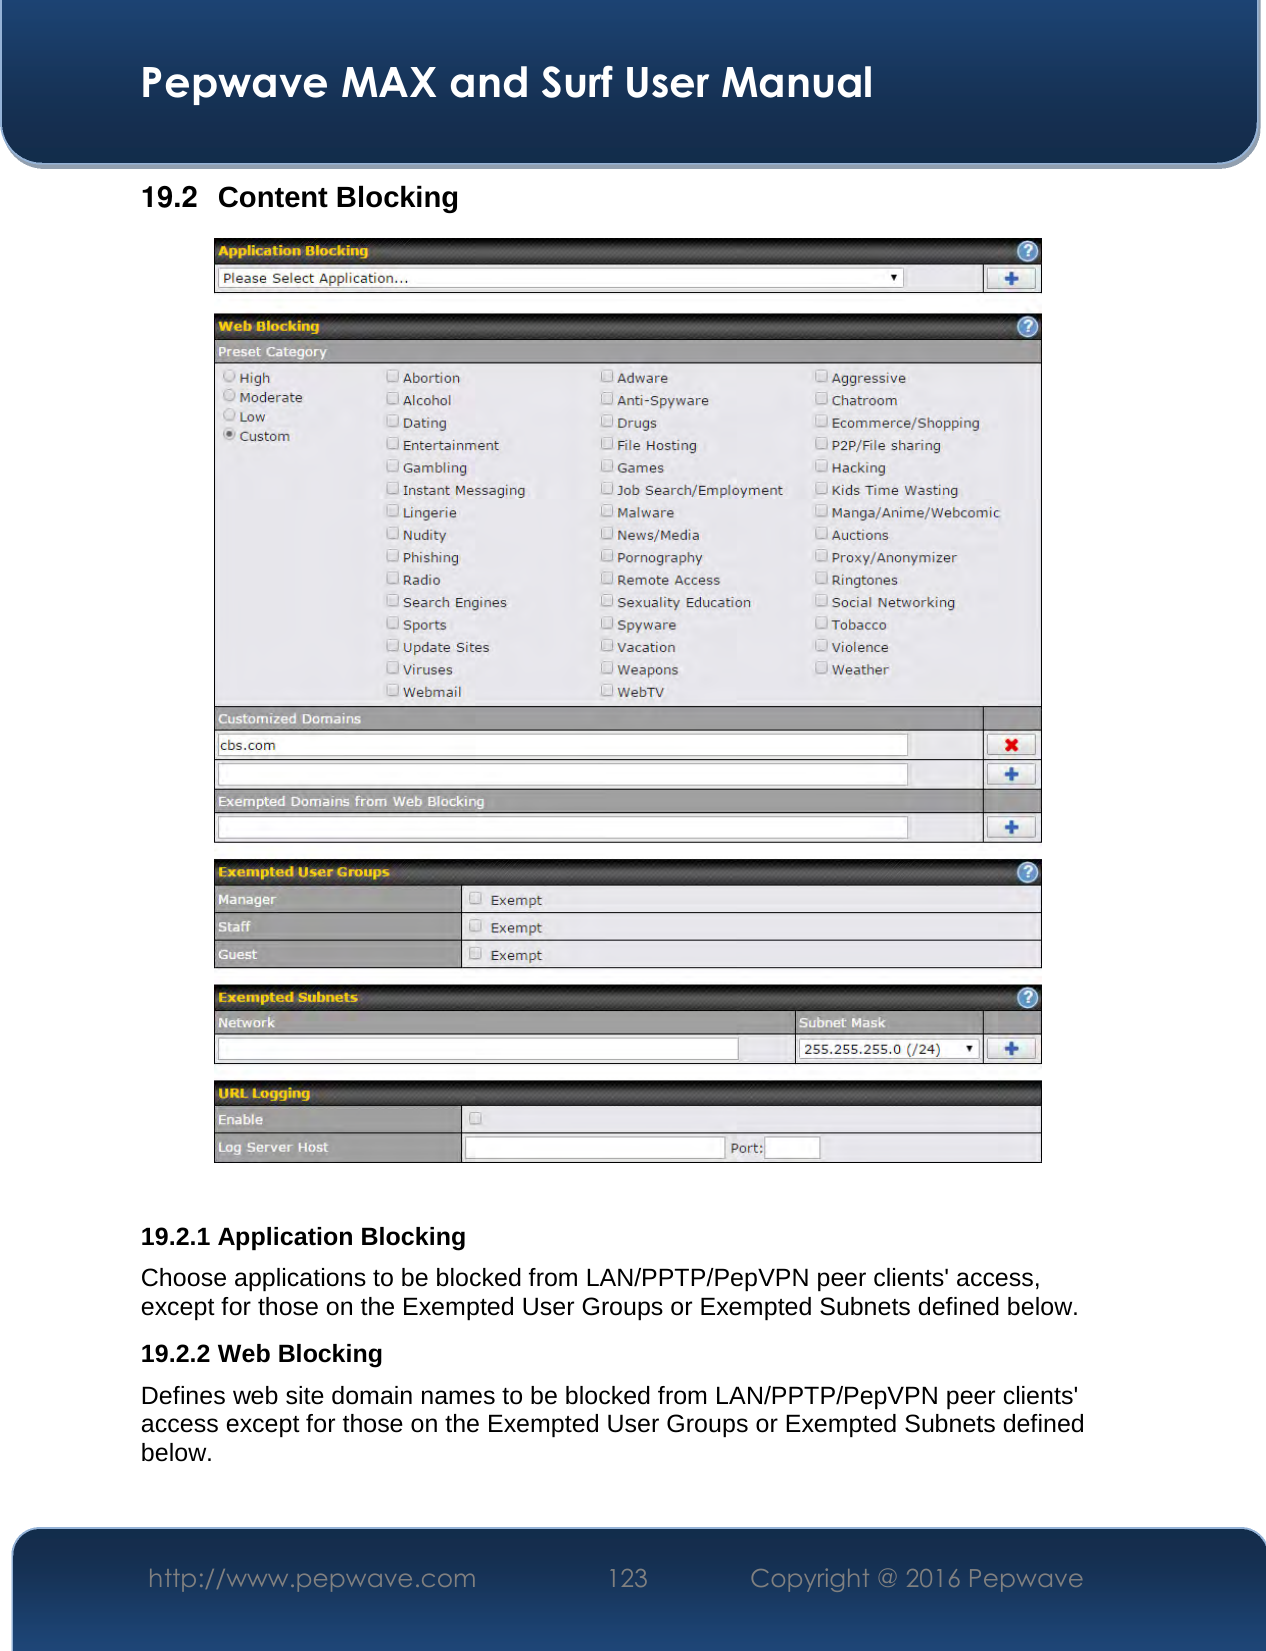  Pepwave MAX and Surf User Manual http://www.pepwave.com  123    Copyright @ 2016 Pepwave   19.2  Content Blocking   19.2.1 Application Blocking Choose applications to be blocked from LAN/PPTP/PepVPN peer clients&apos; access, except for those on the Exempted User Groups or Exempted Subnets defined below. 19.2.2 Web Blocking Defines web site domain names to be blocked from LAN/PPTP/PepVPN peer clients&apos; access except for those on the Exempted User Groups or Exempted Subnets defined below.  